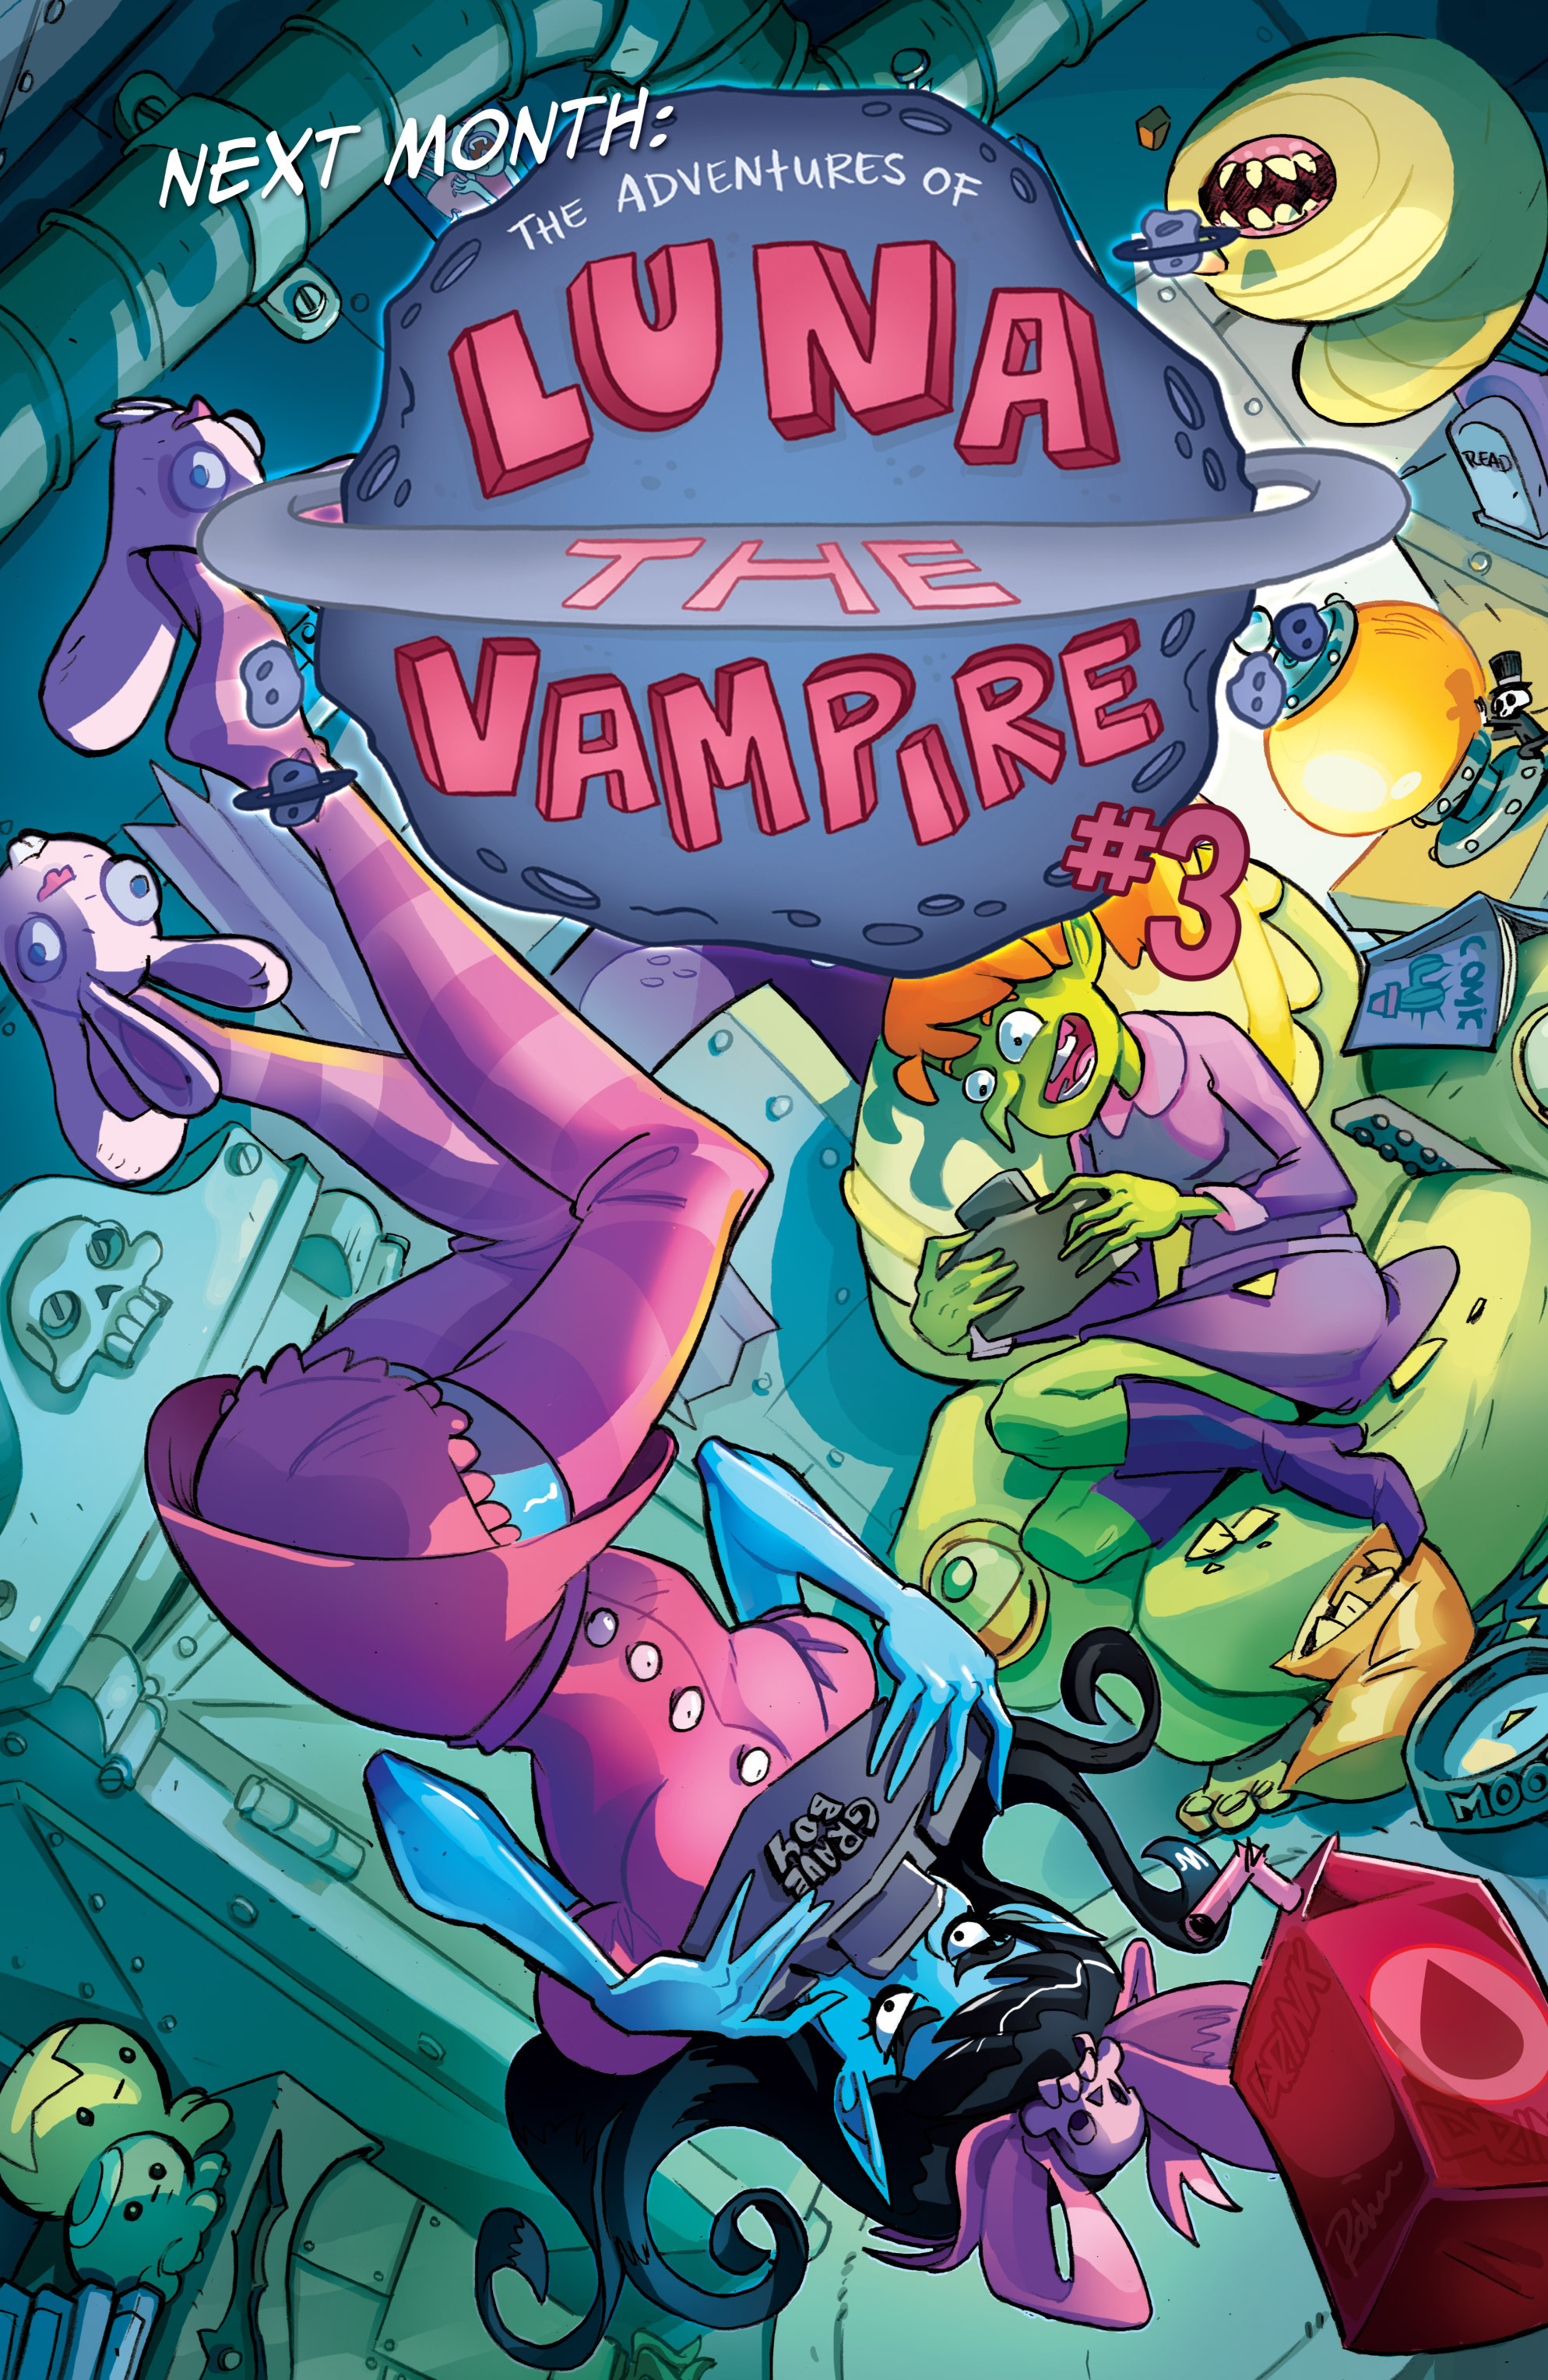 Read online The Adventures of Luna the Vampire comic -  Issue #2 - 25